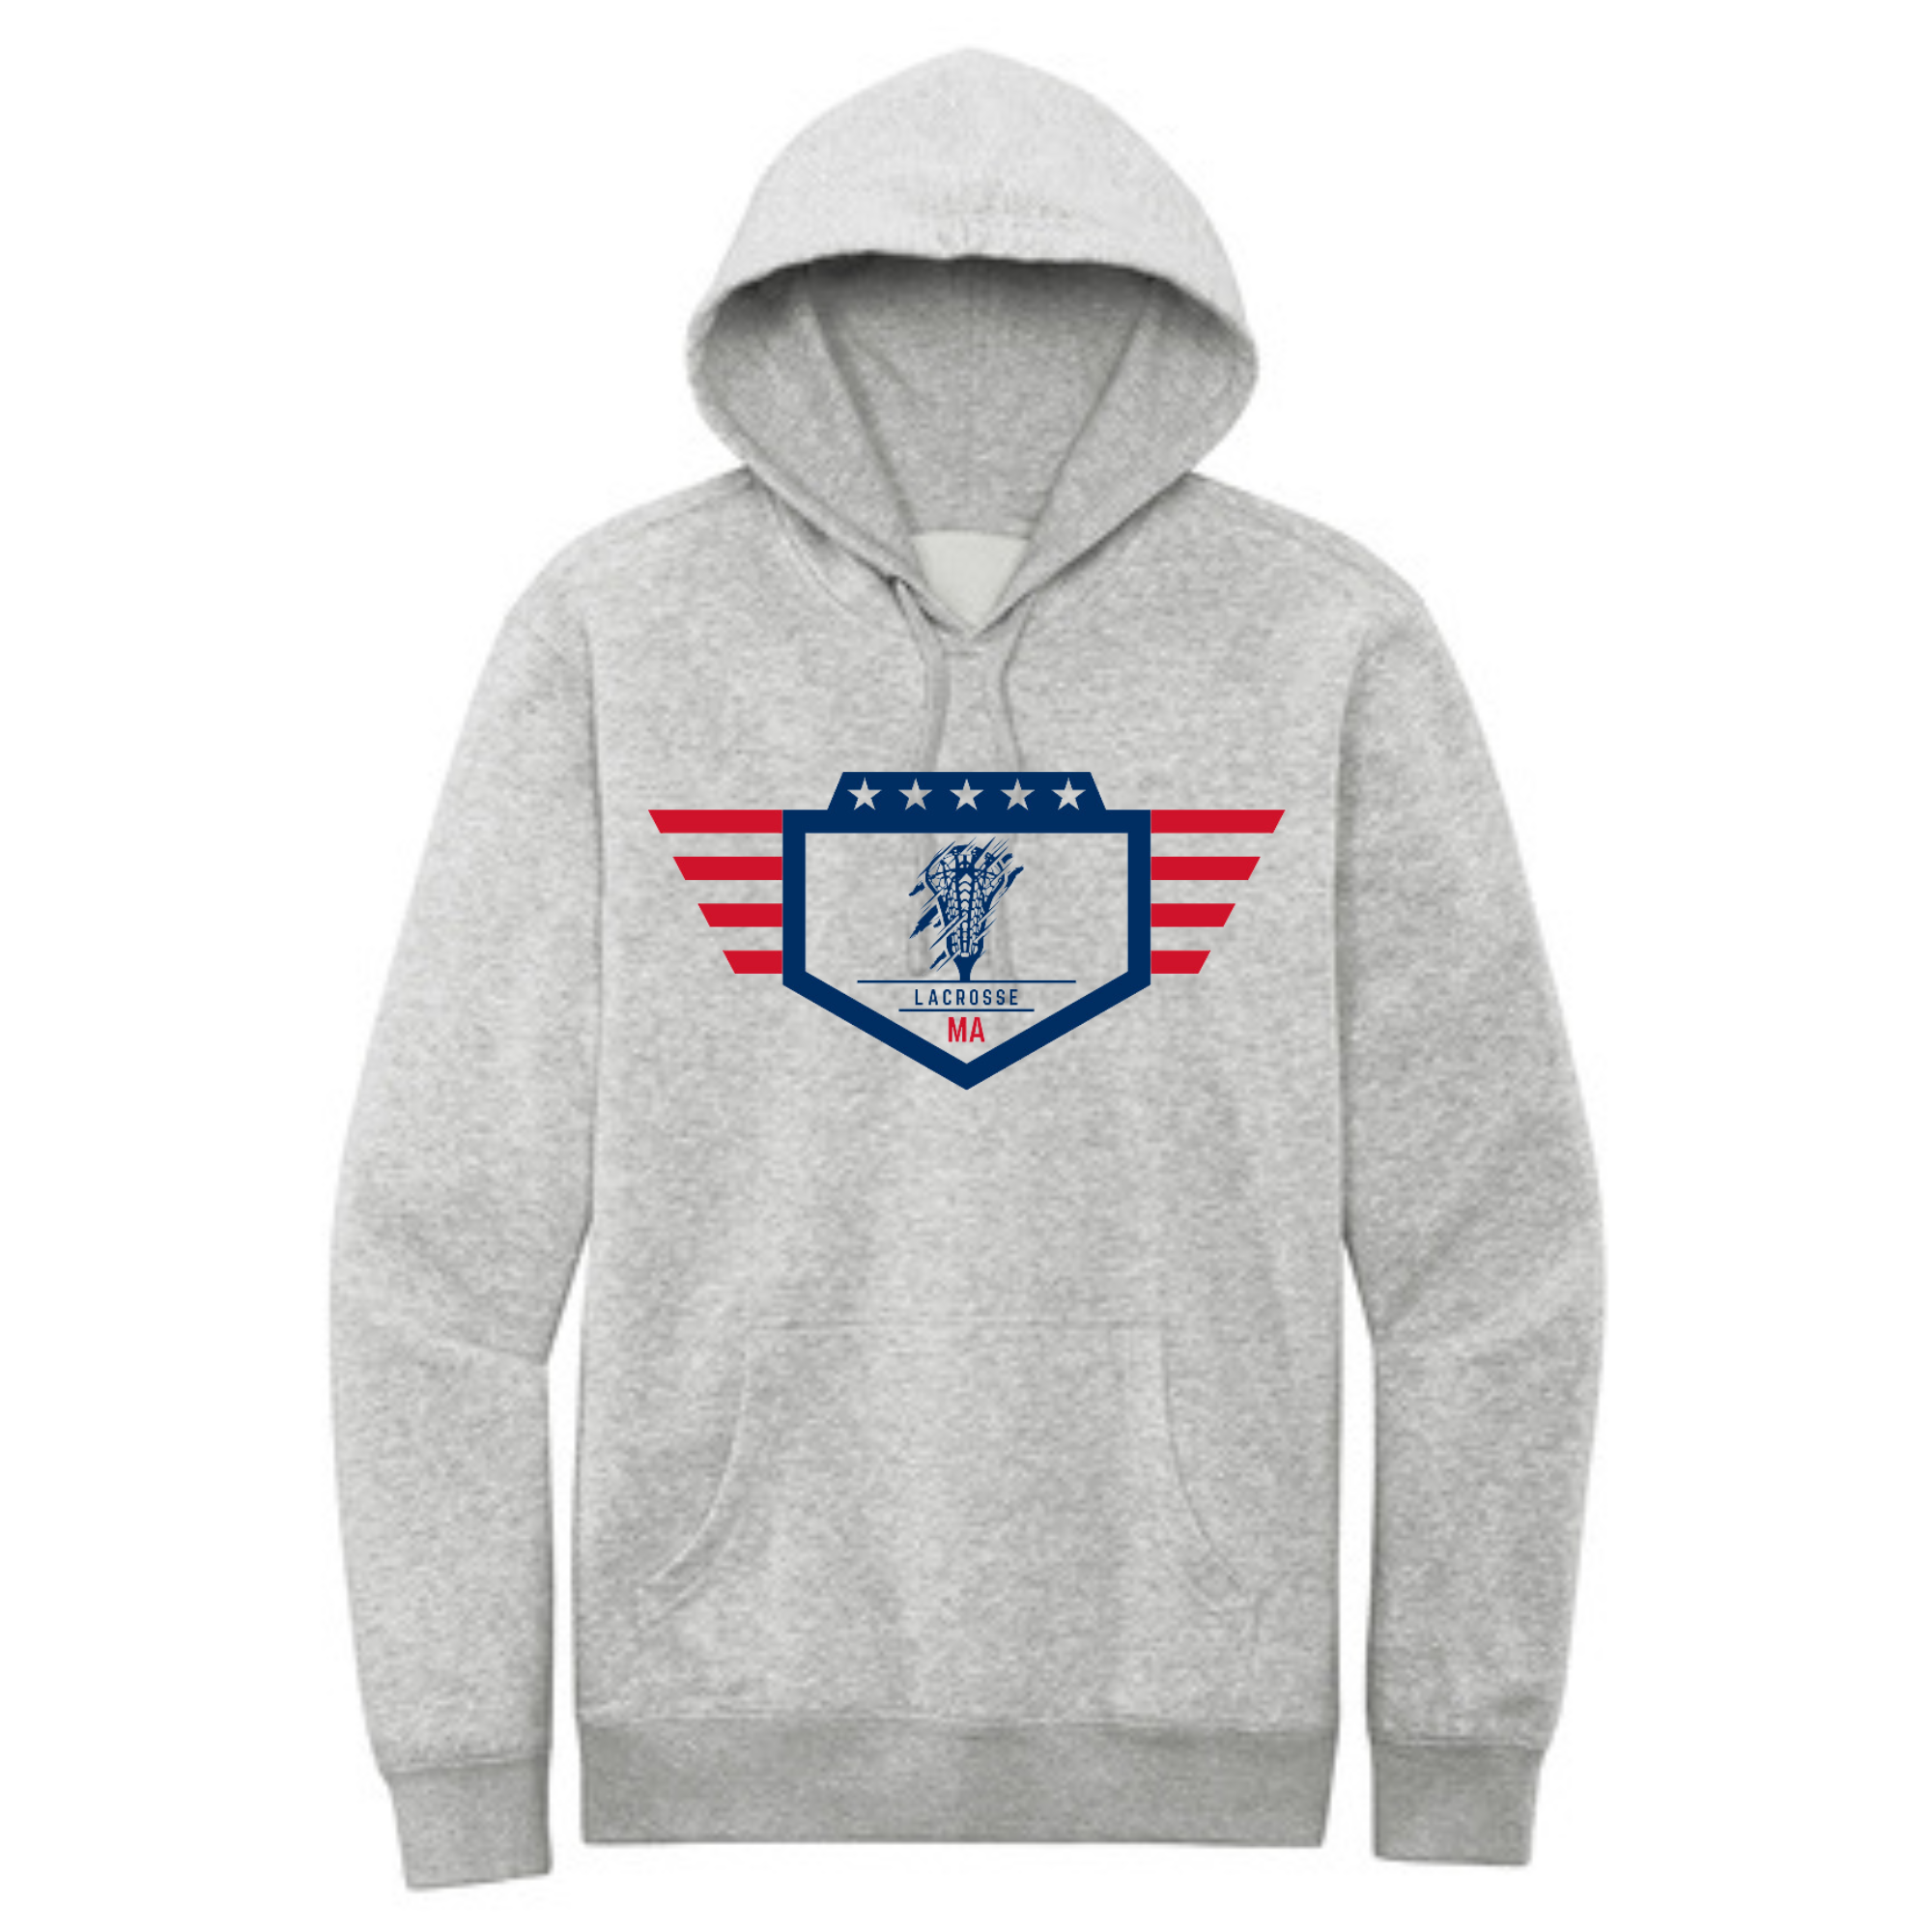 TUNEUP TOURNAMENT MA LACROSSE ADULT HOODIE - GRAY